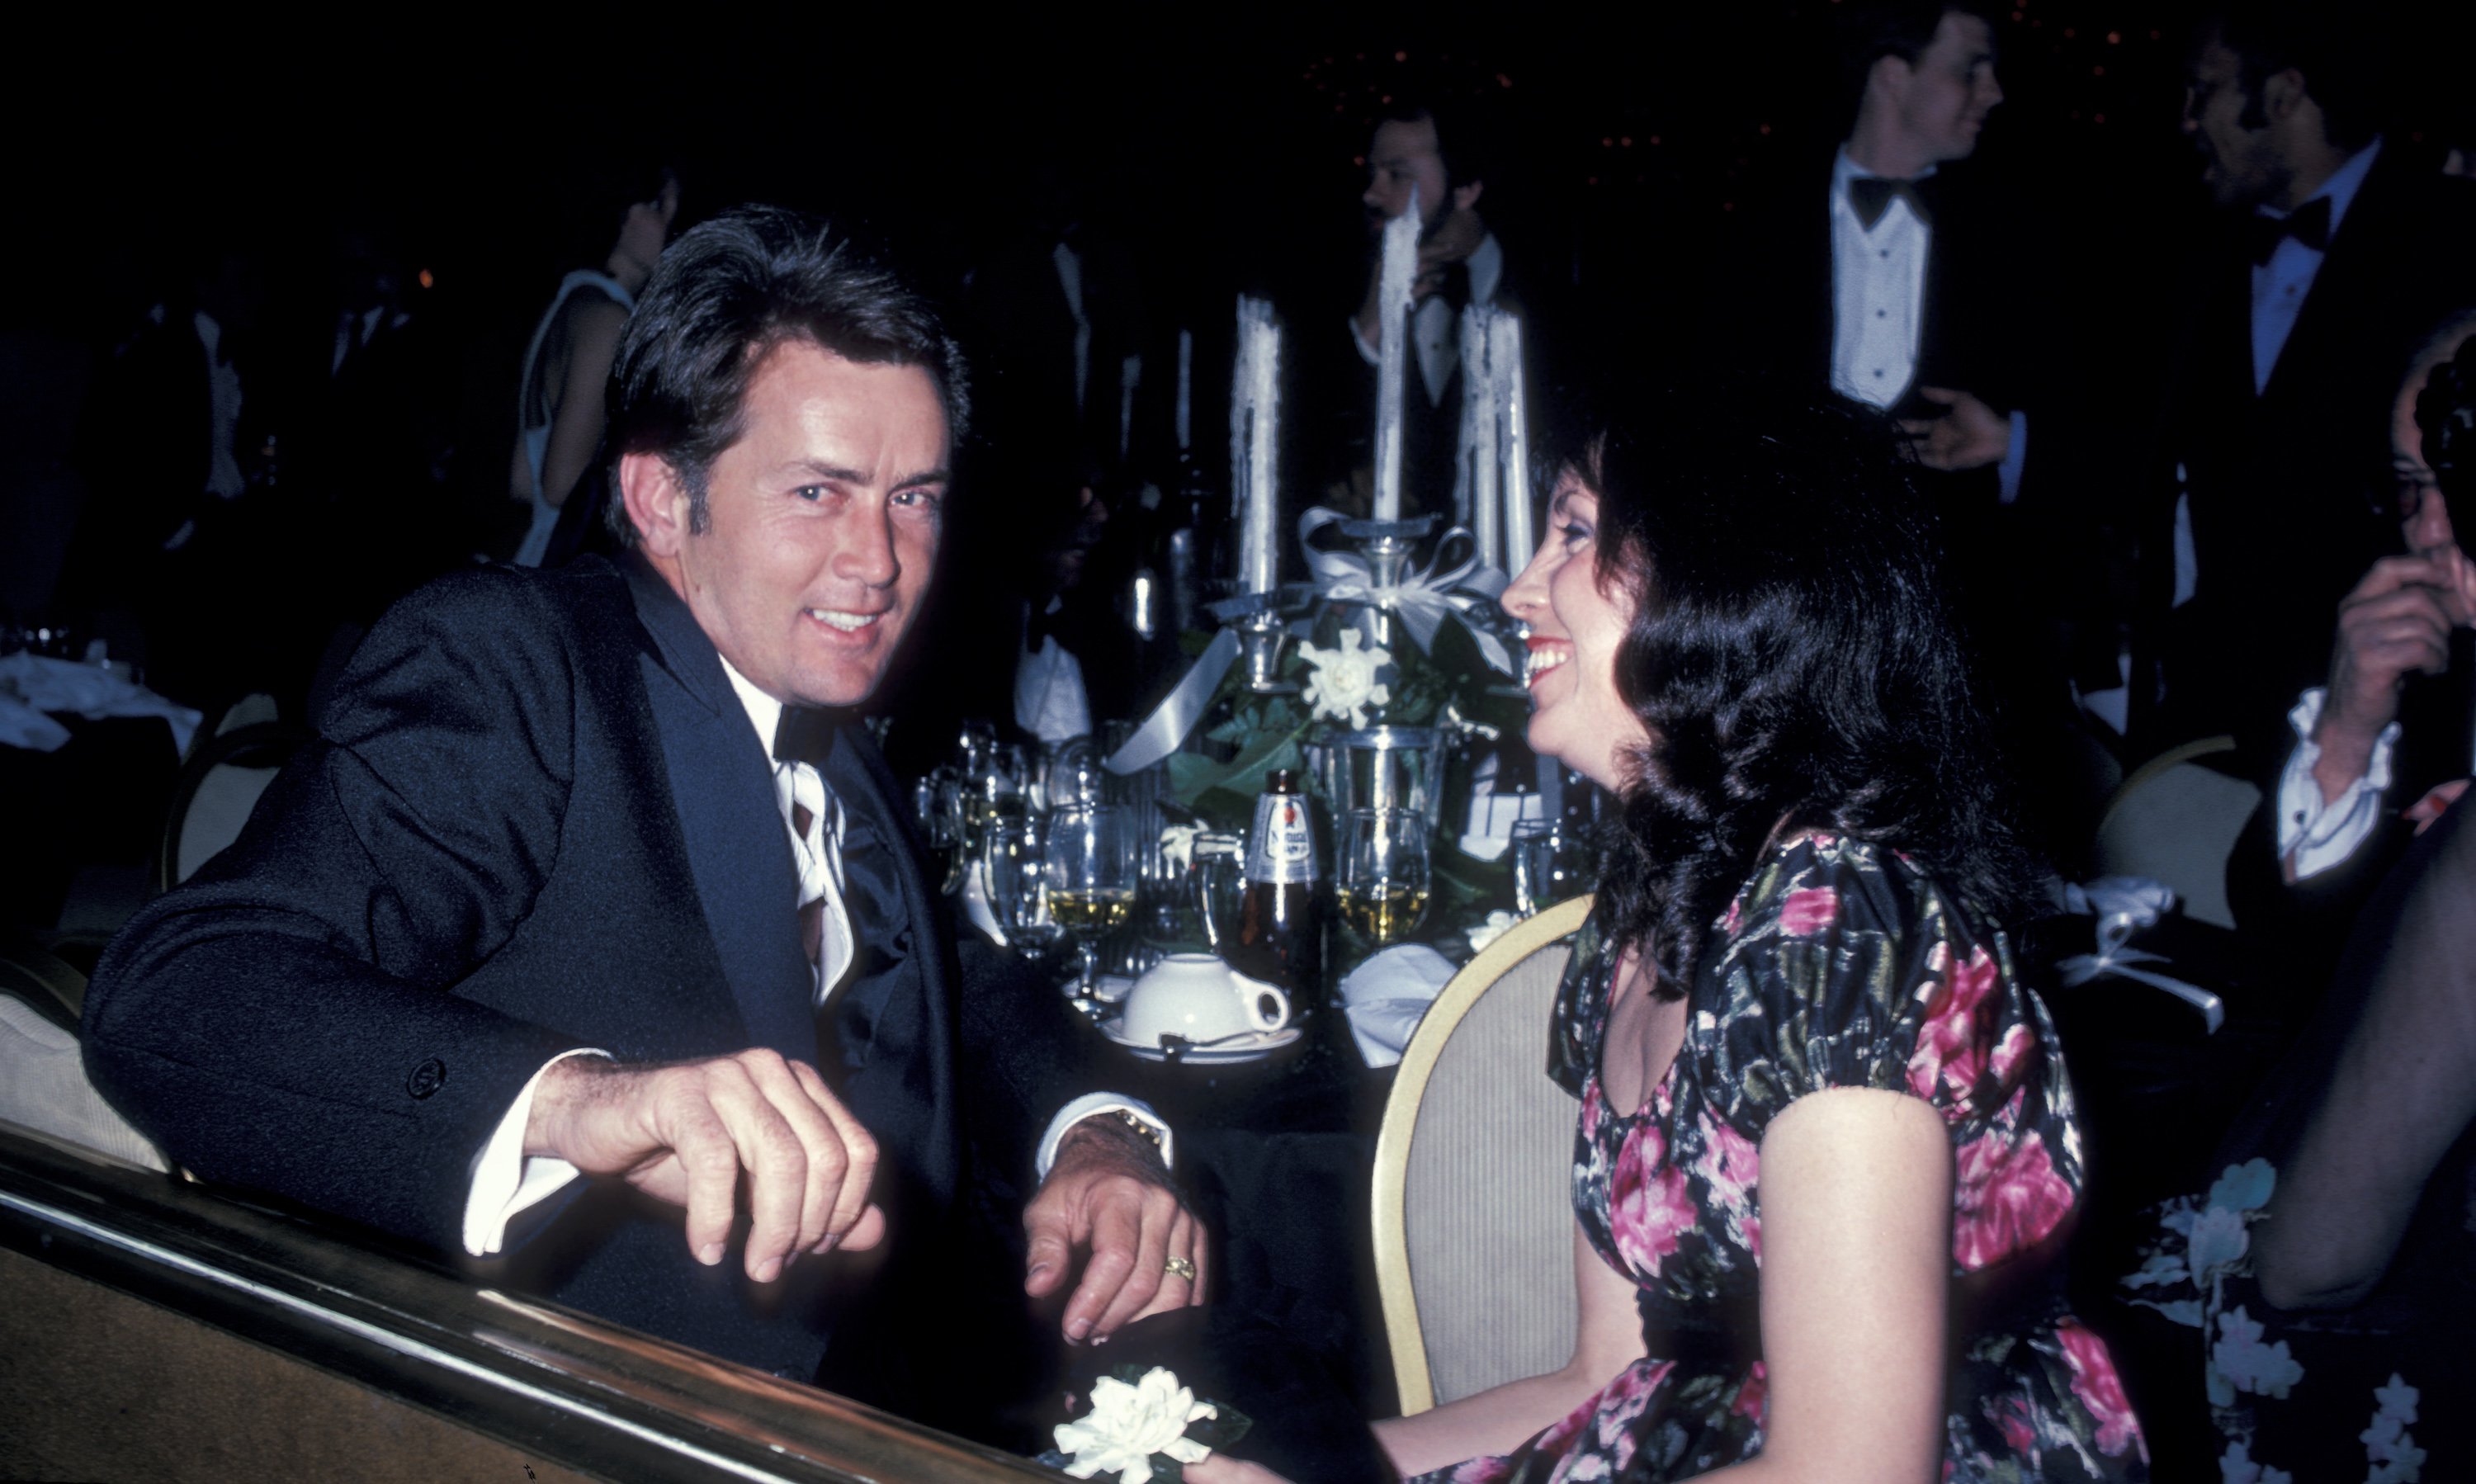 Martin Sheen and Janet Sheen during "Insight" gala dinner at Beverly Hilton Hotel on March 21, 1980 in Beverly Hills, California. / Source: Getty Images